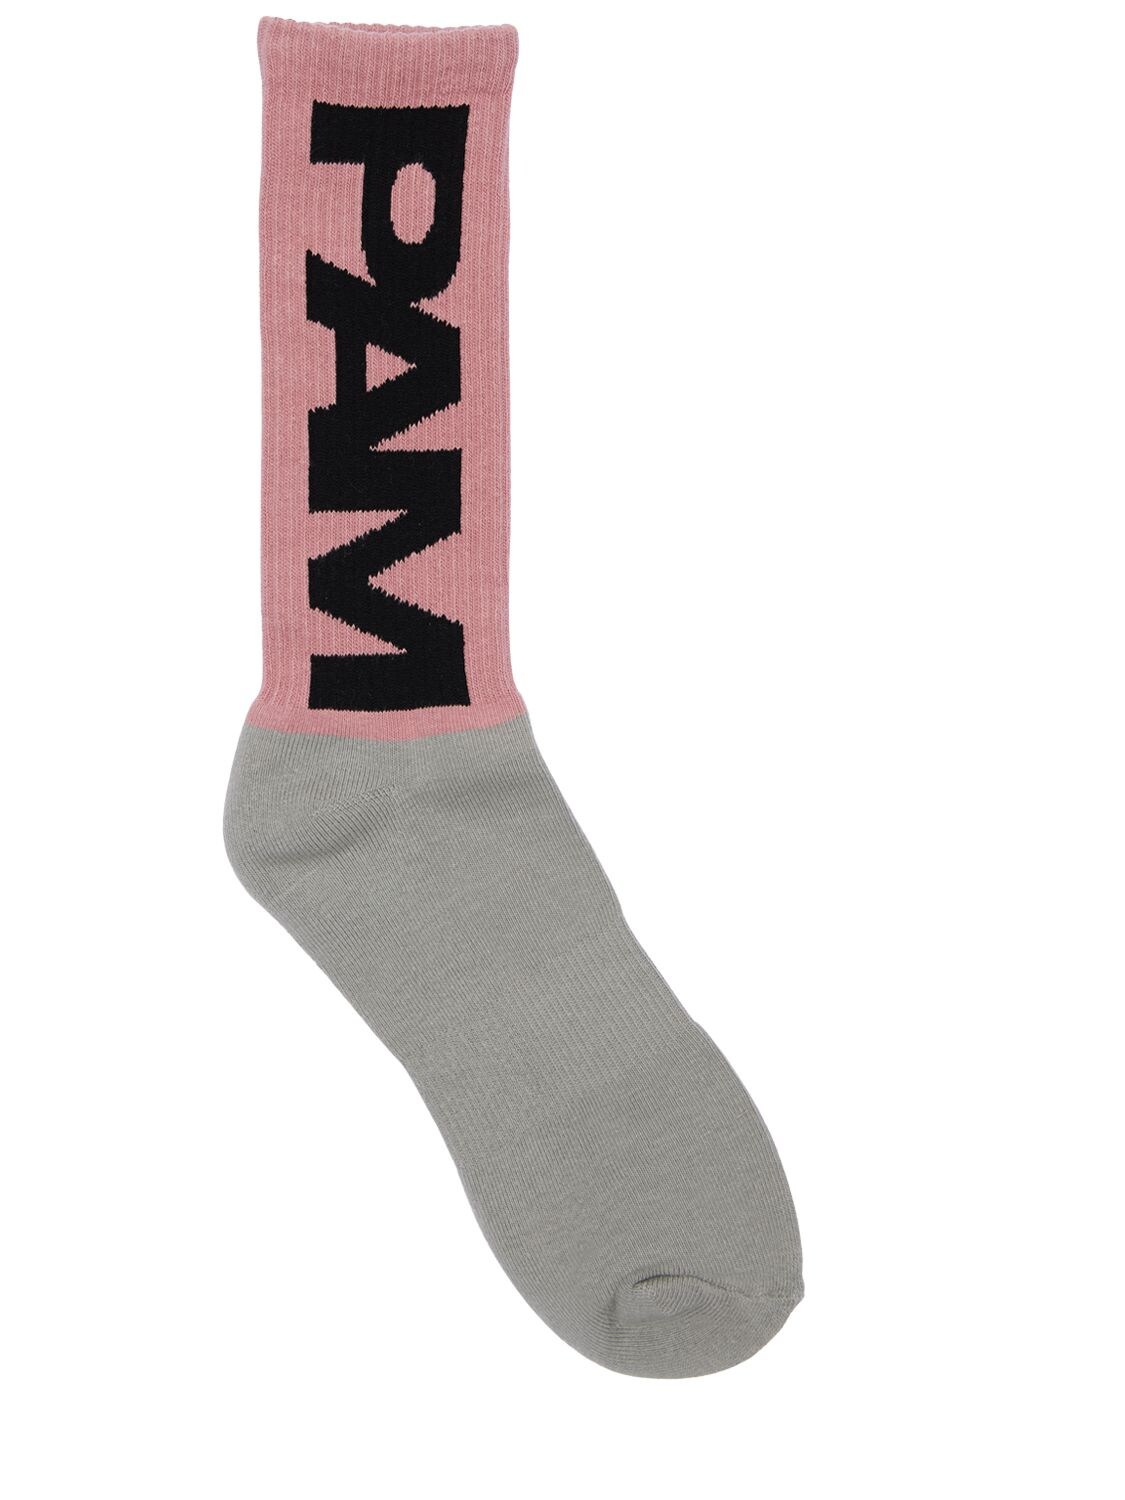 Pam - Perks And Mini Pam Btc Unisex Cotton Blend Socks In Grey,pink